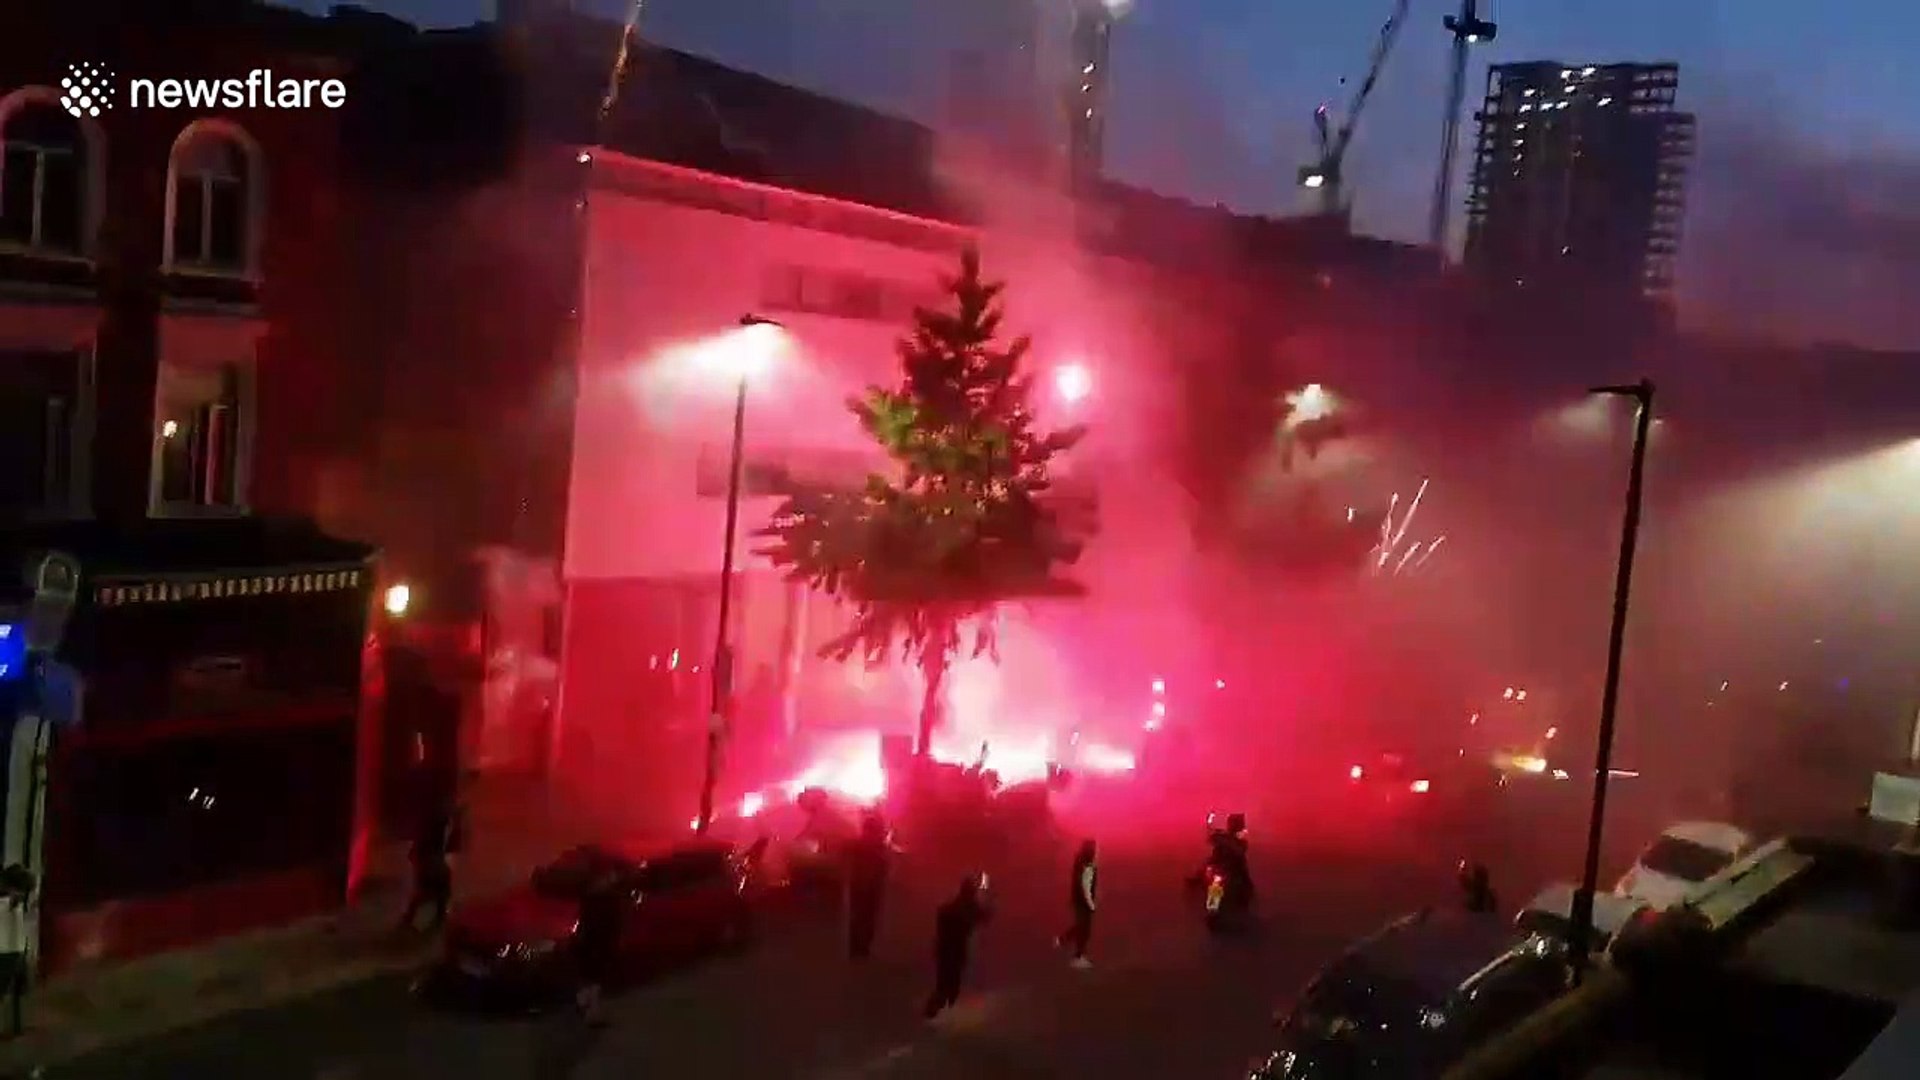 Algerian football fans in London celebrate African Cup of Nations victory